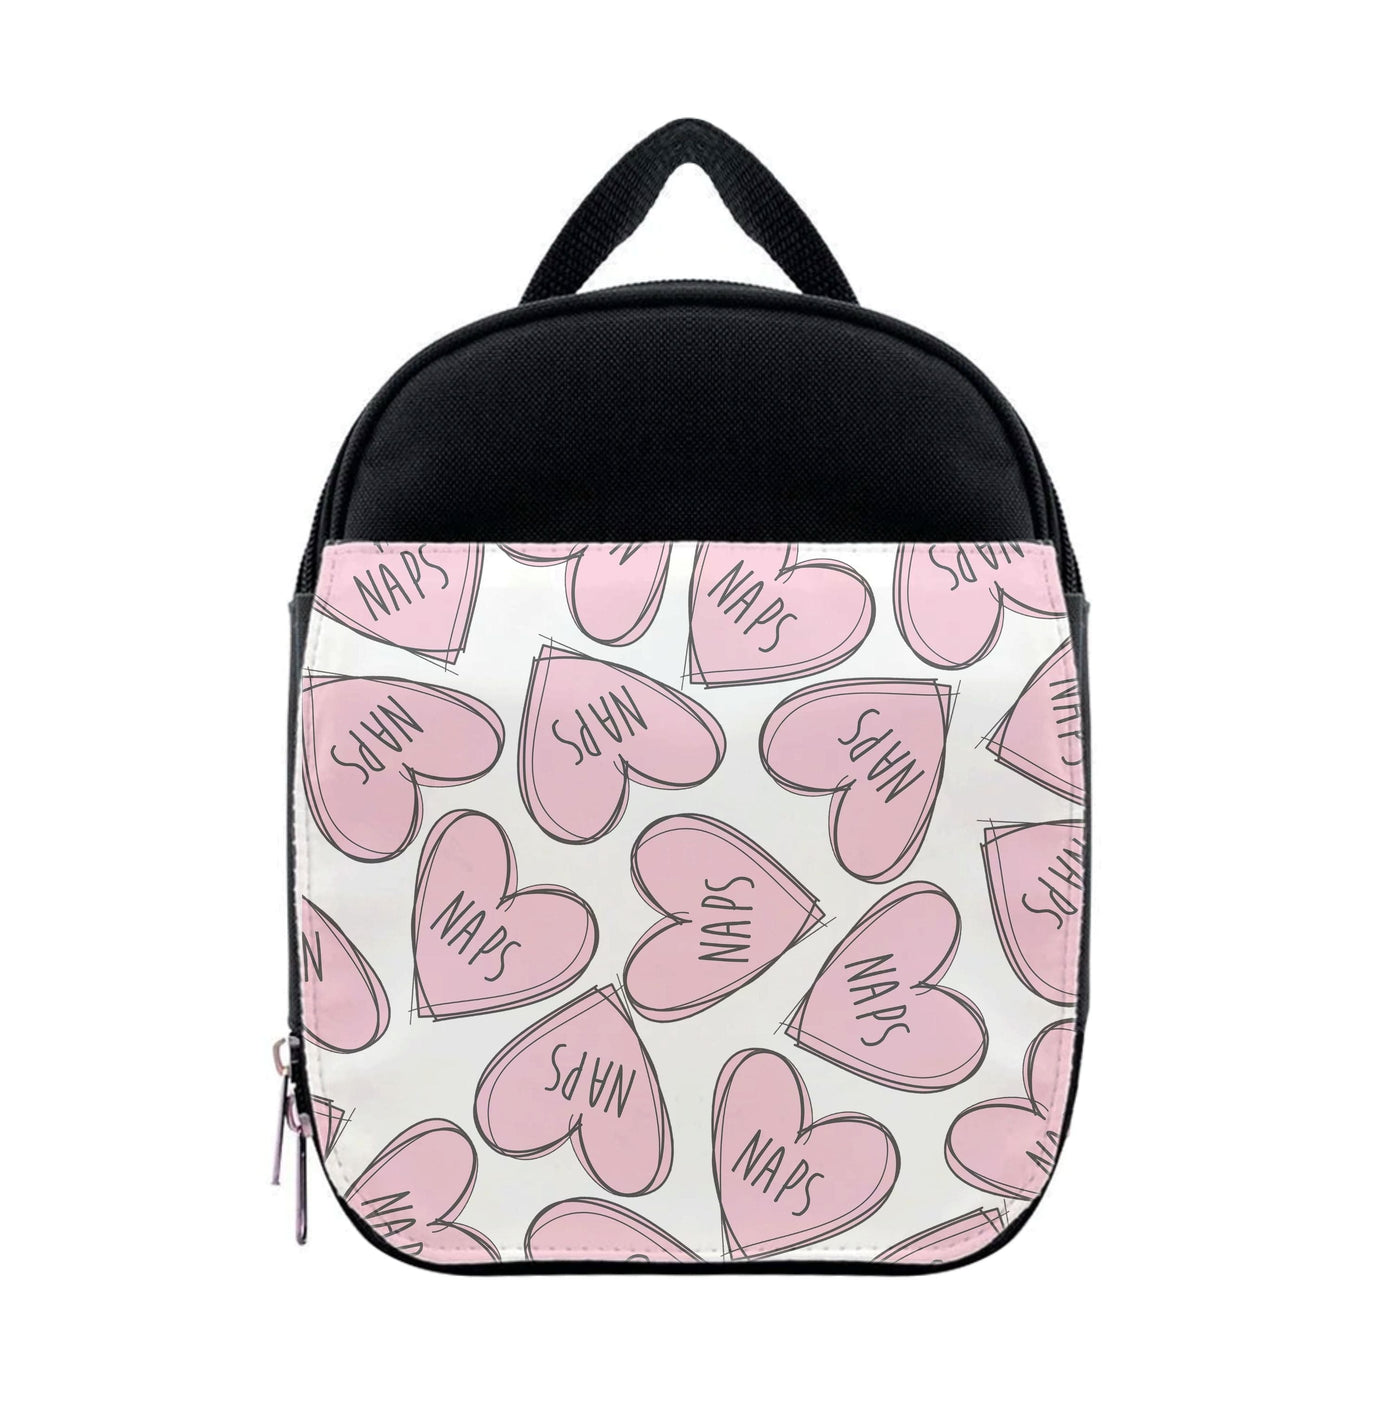 Nap Hearts, Tumblr Inspired Lunchbox